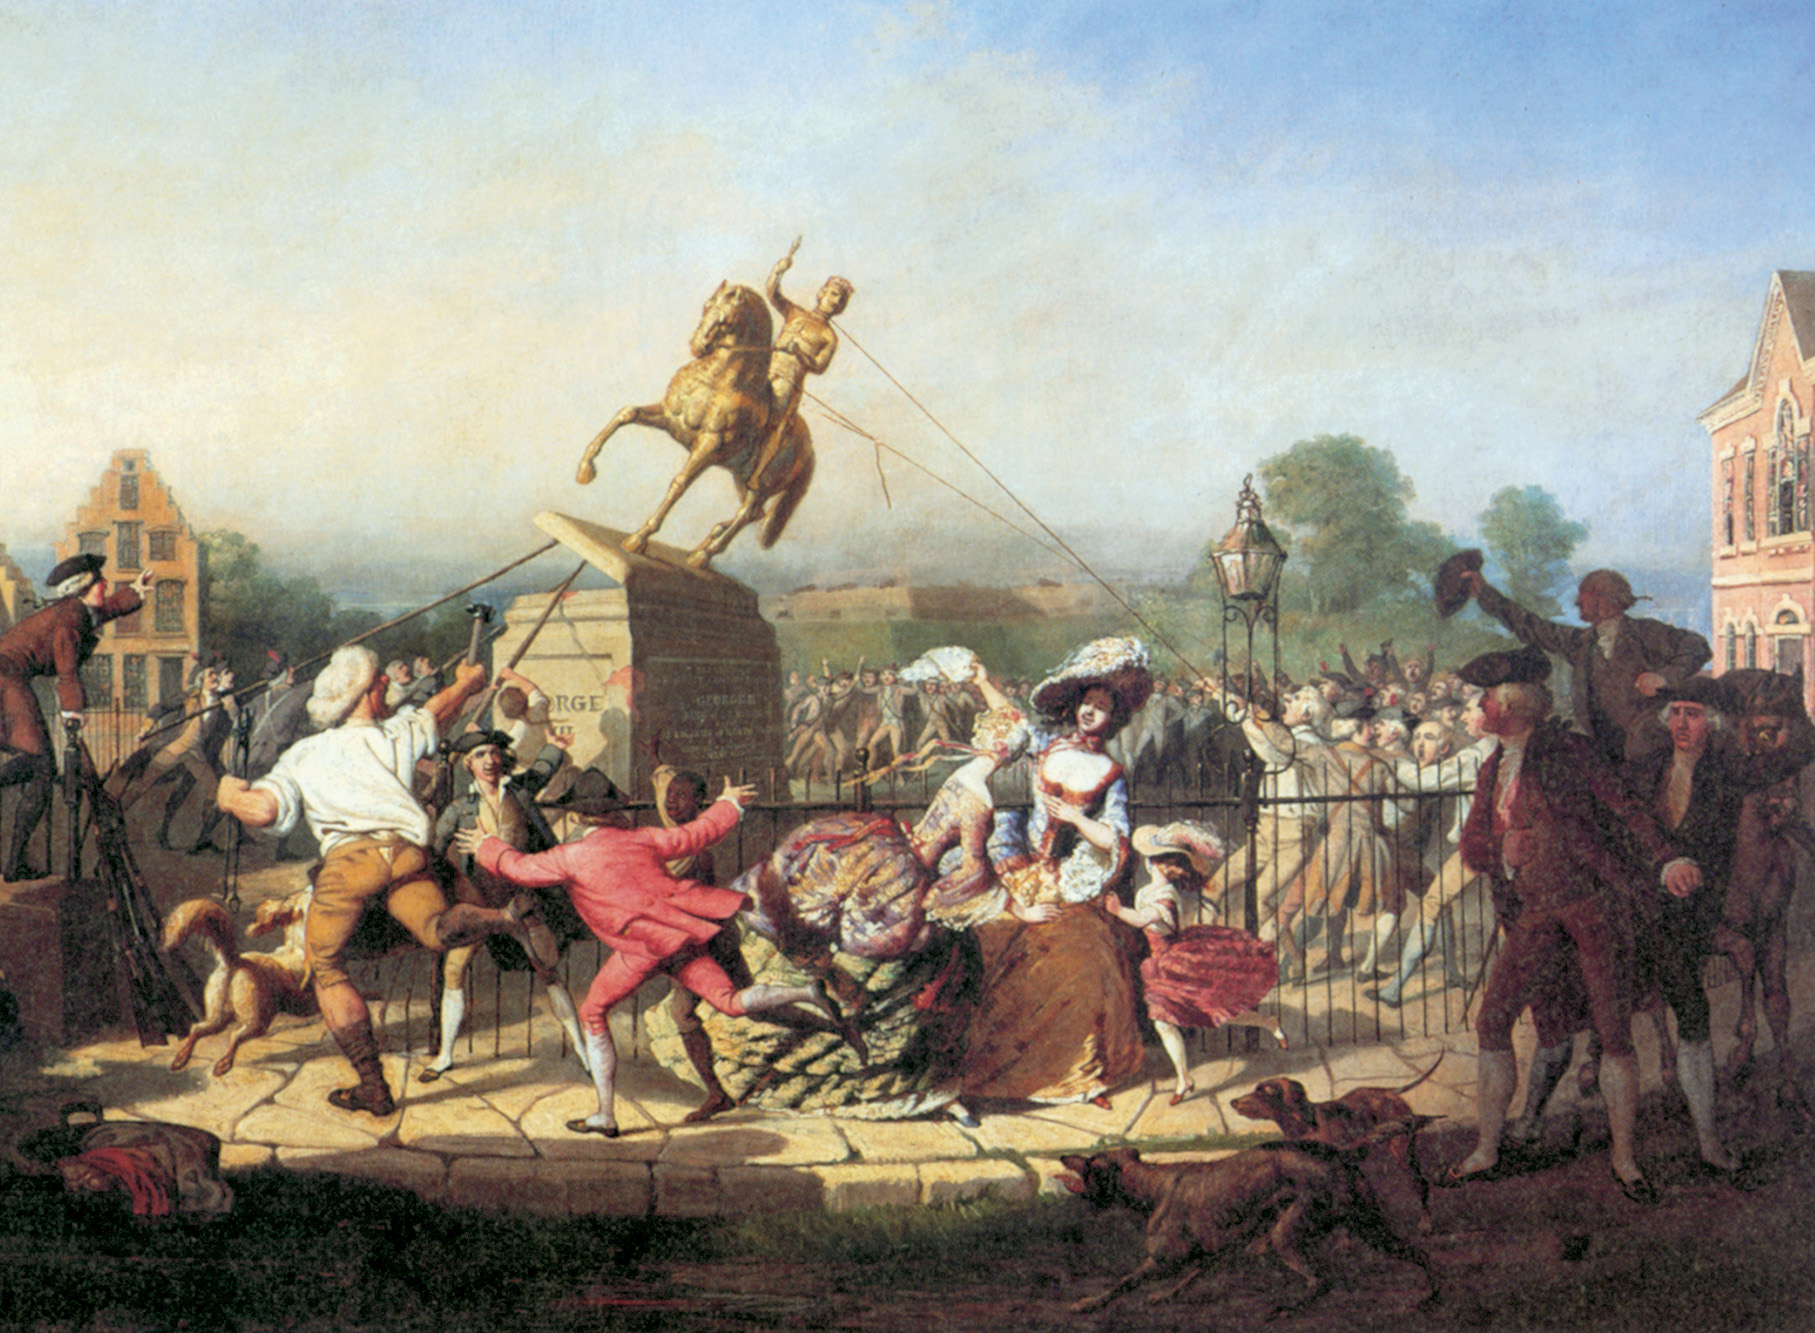 New Yorkers show their displeasure in the monarchy by pulling down the lead statue of King George III in Bowling Green in 1776. The metal was used to make 42,000 musket balls for the Rebels.